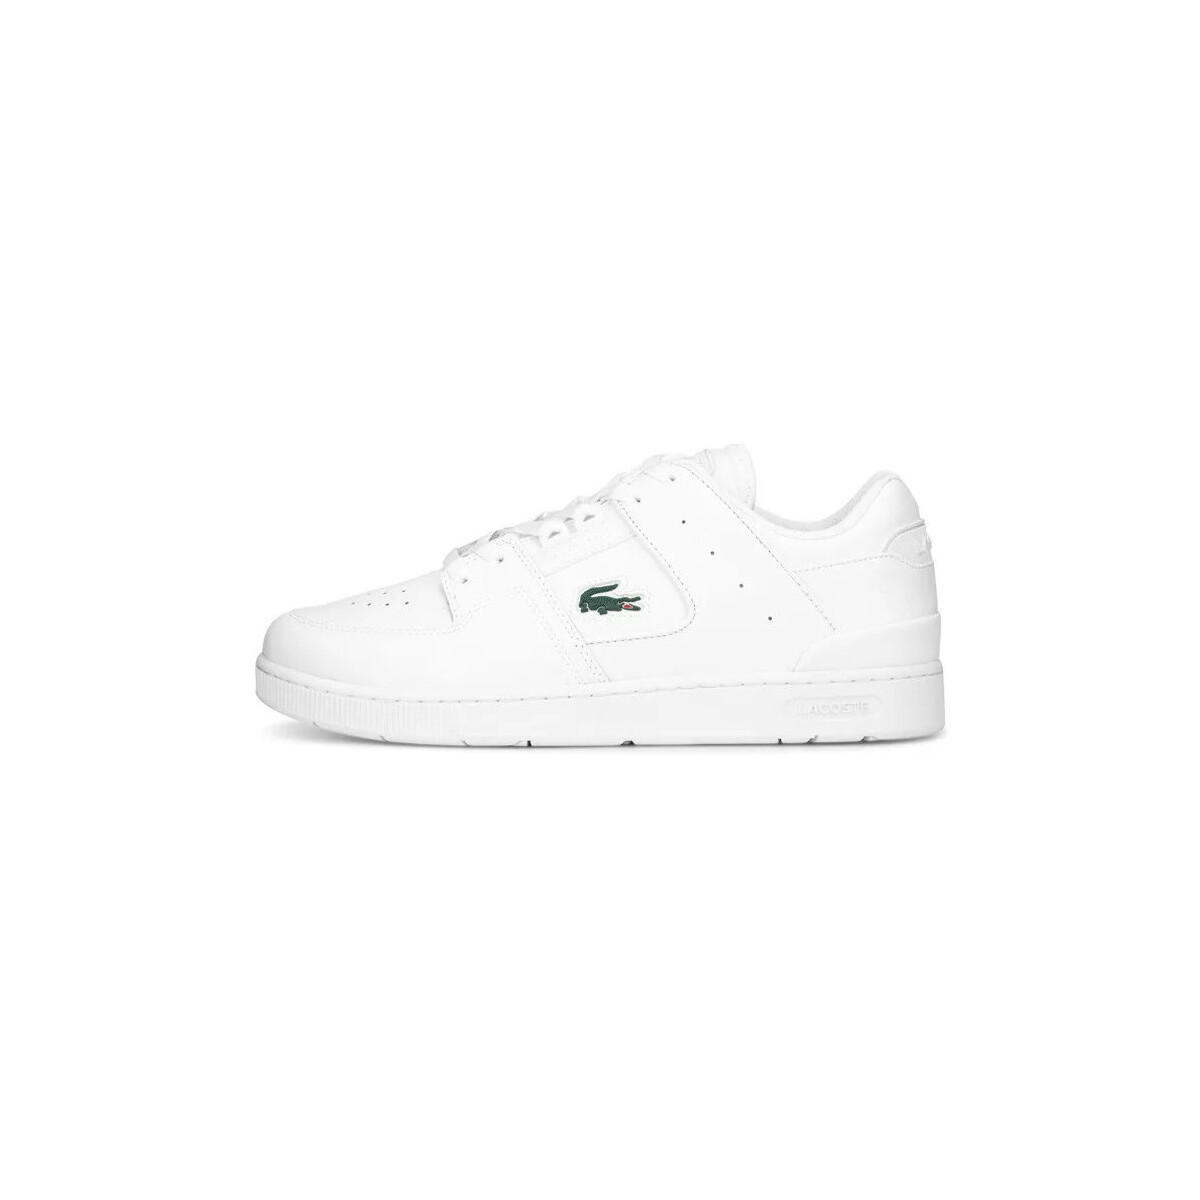 Chaussures Homme sneakers lacoste bassa chaymon bl 1 cma COURT CAGE Blanc